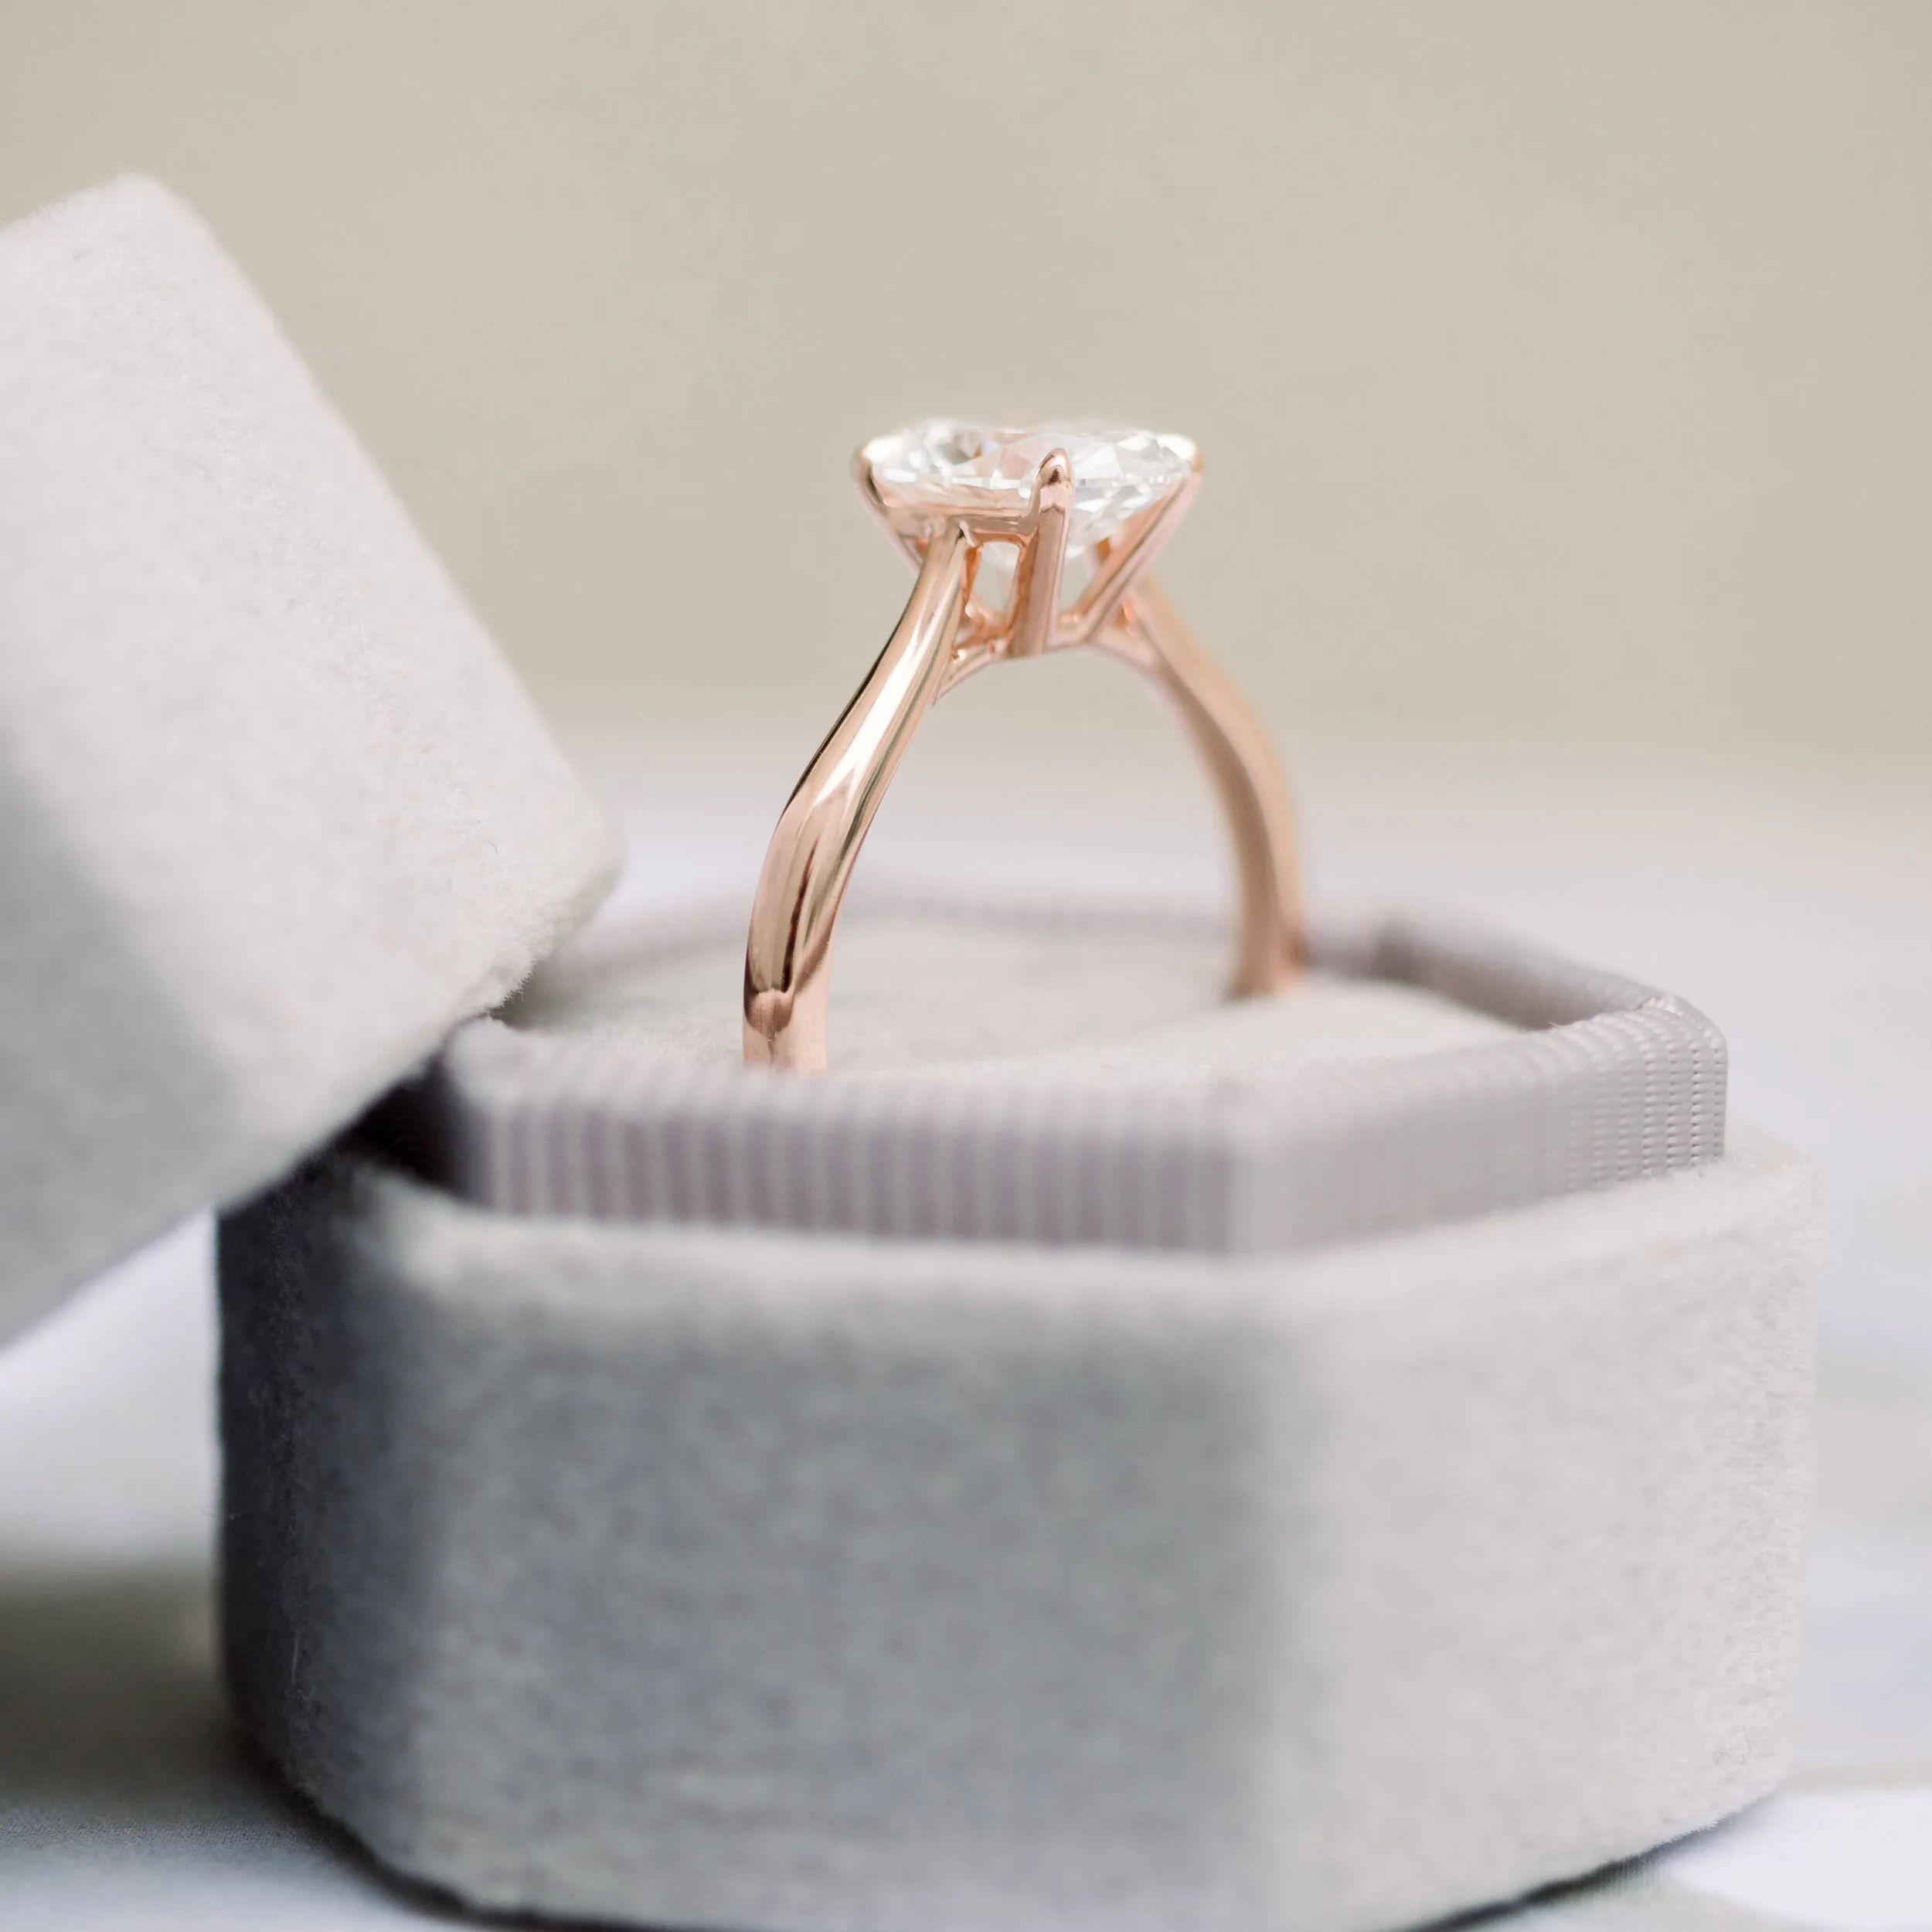 1.5 Carat Diamonds set in 14k Rose Gold Open Tapered Cathedral Solitaire Diamond Engagement Ring (Side View)